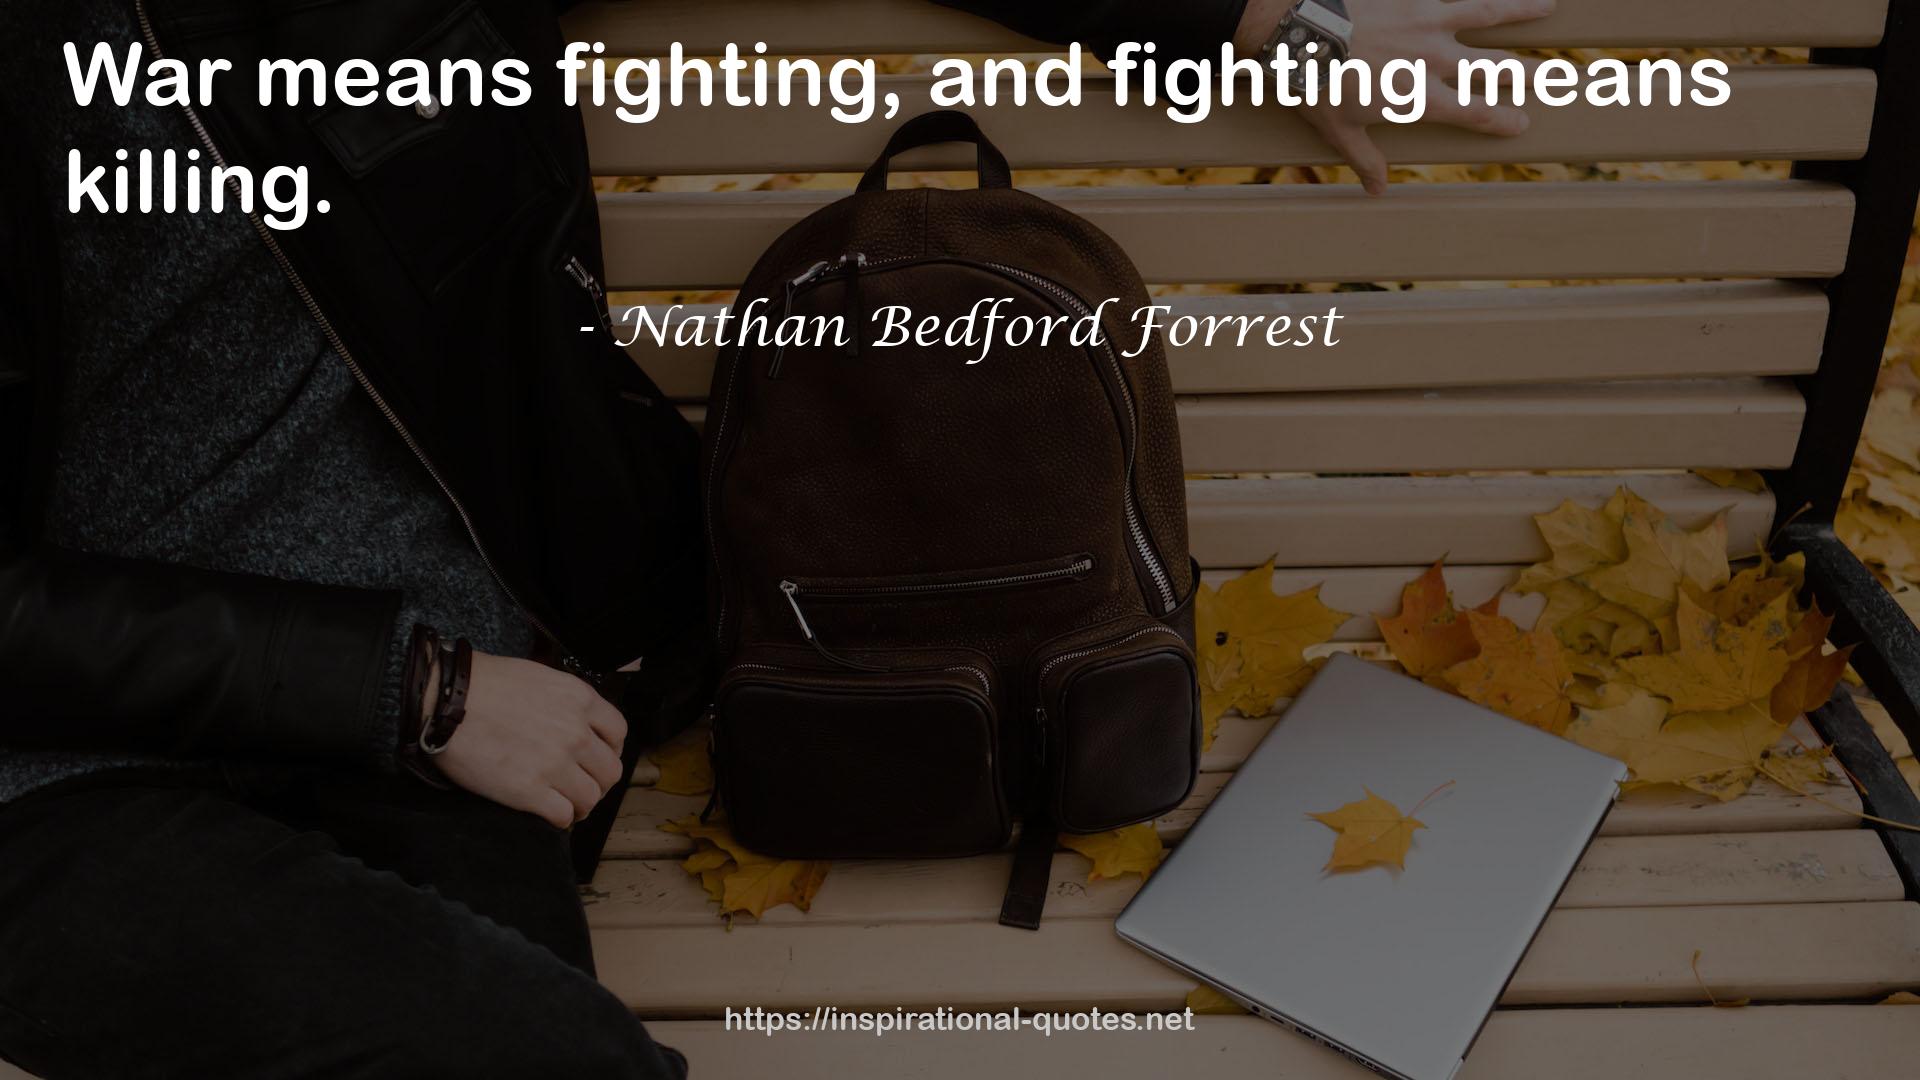 Nathan Bedford Forrest QUOTES